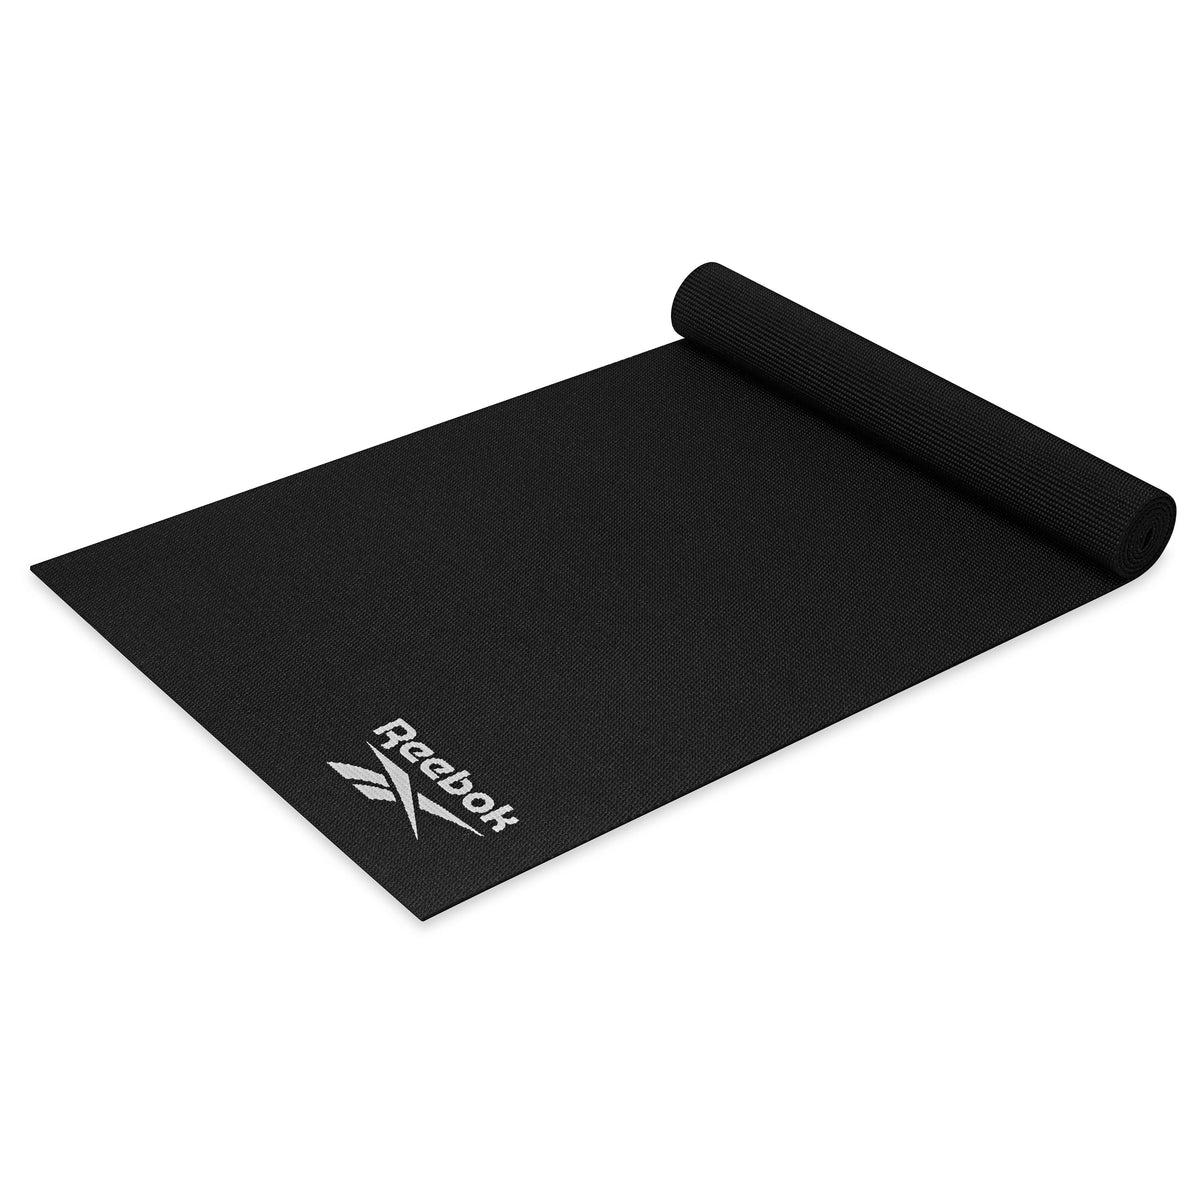 Reebok Solid Yoga Mat (5mm) Black top rolled angle